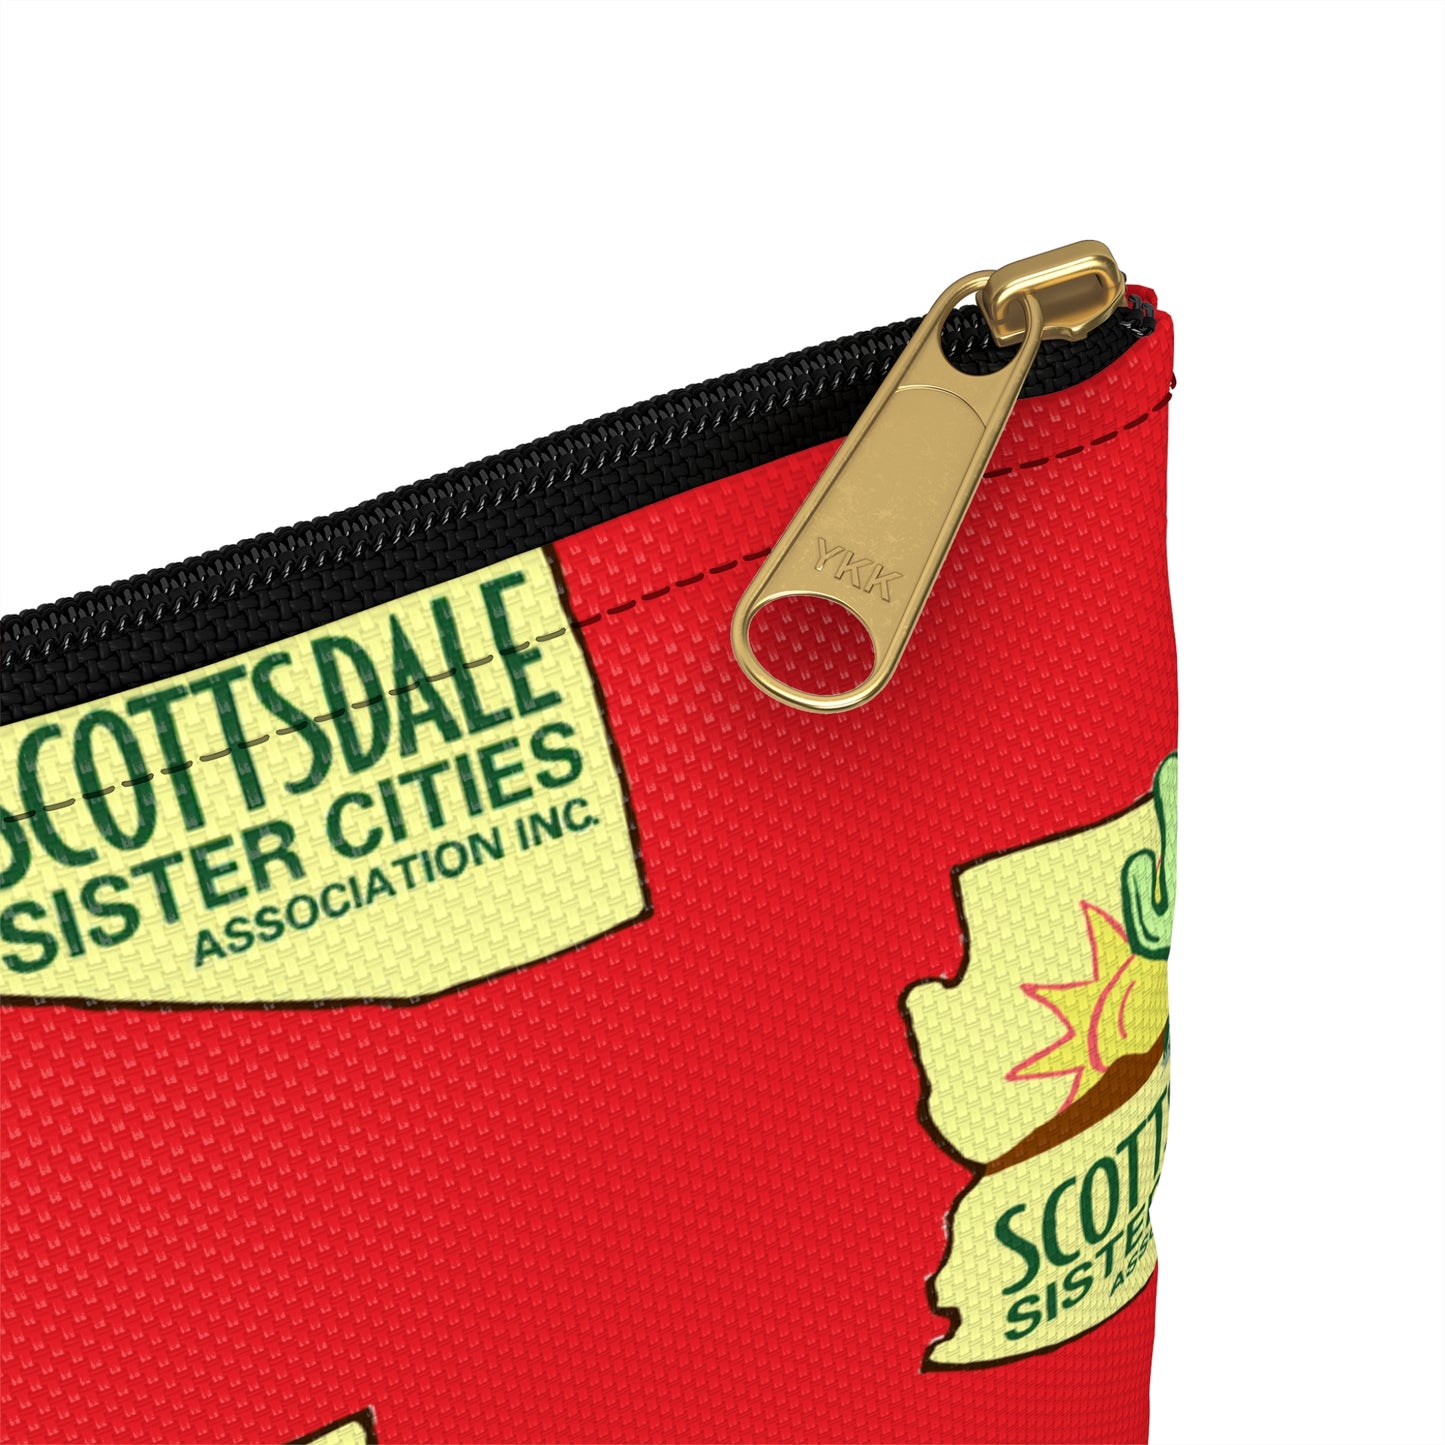 SSCA Accessory Pouch - Red